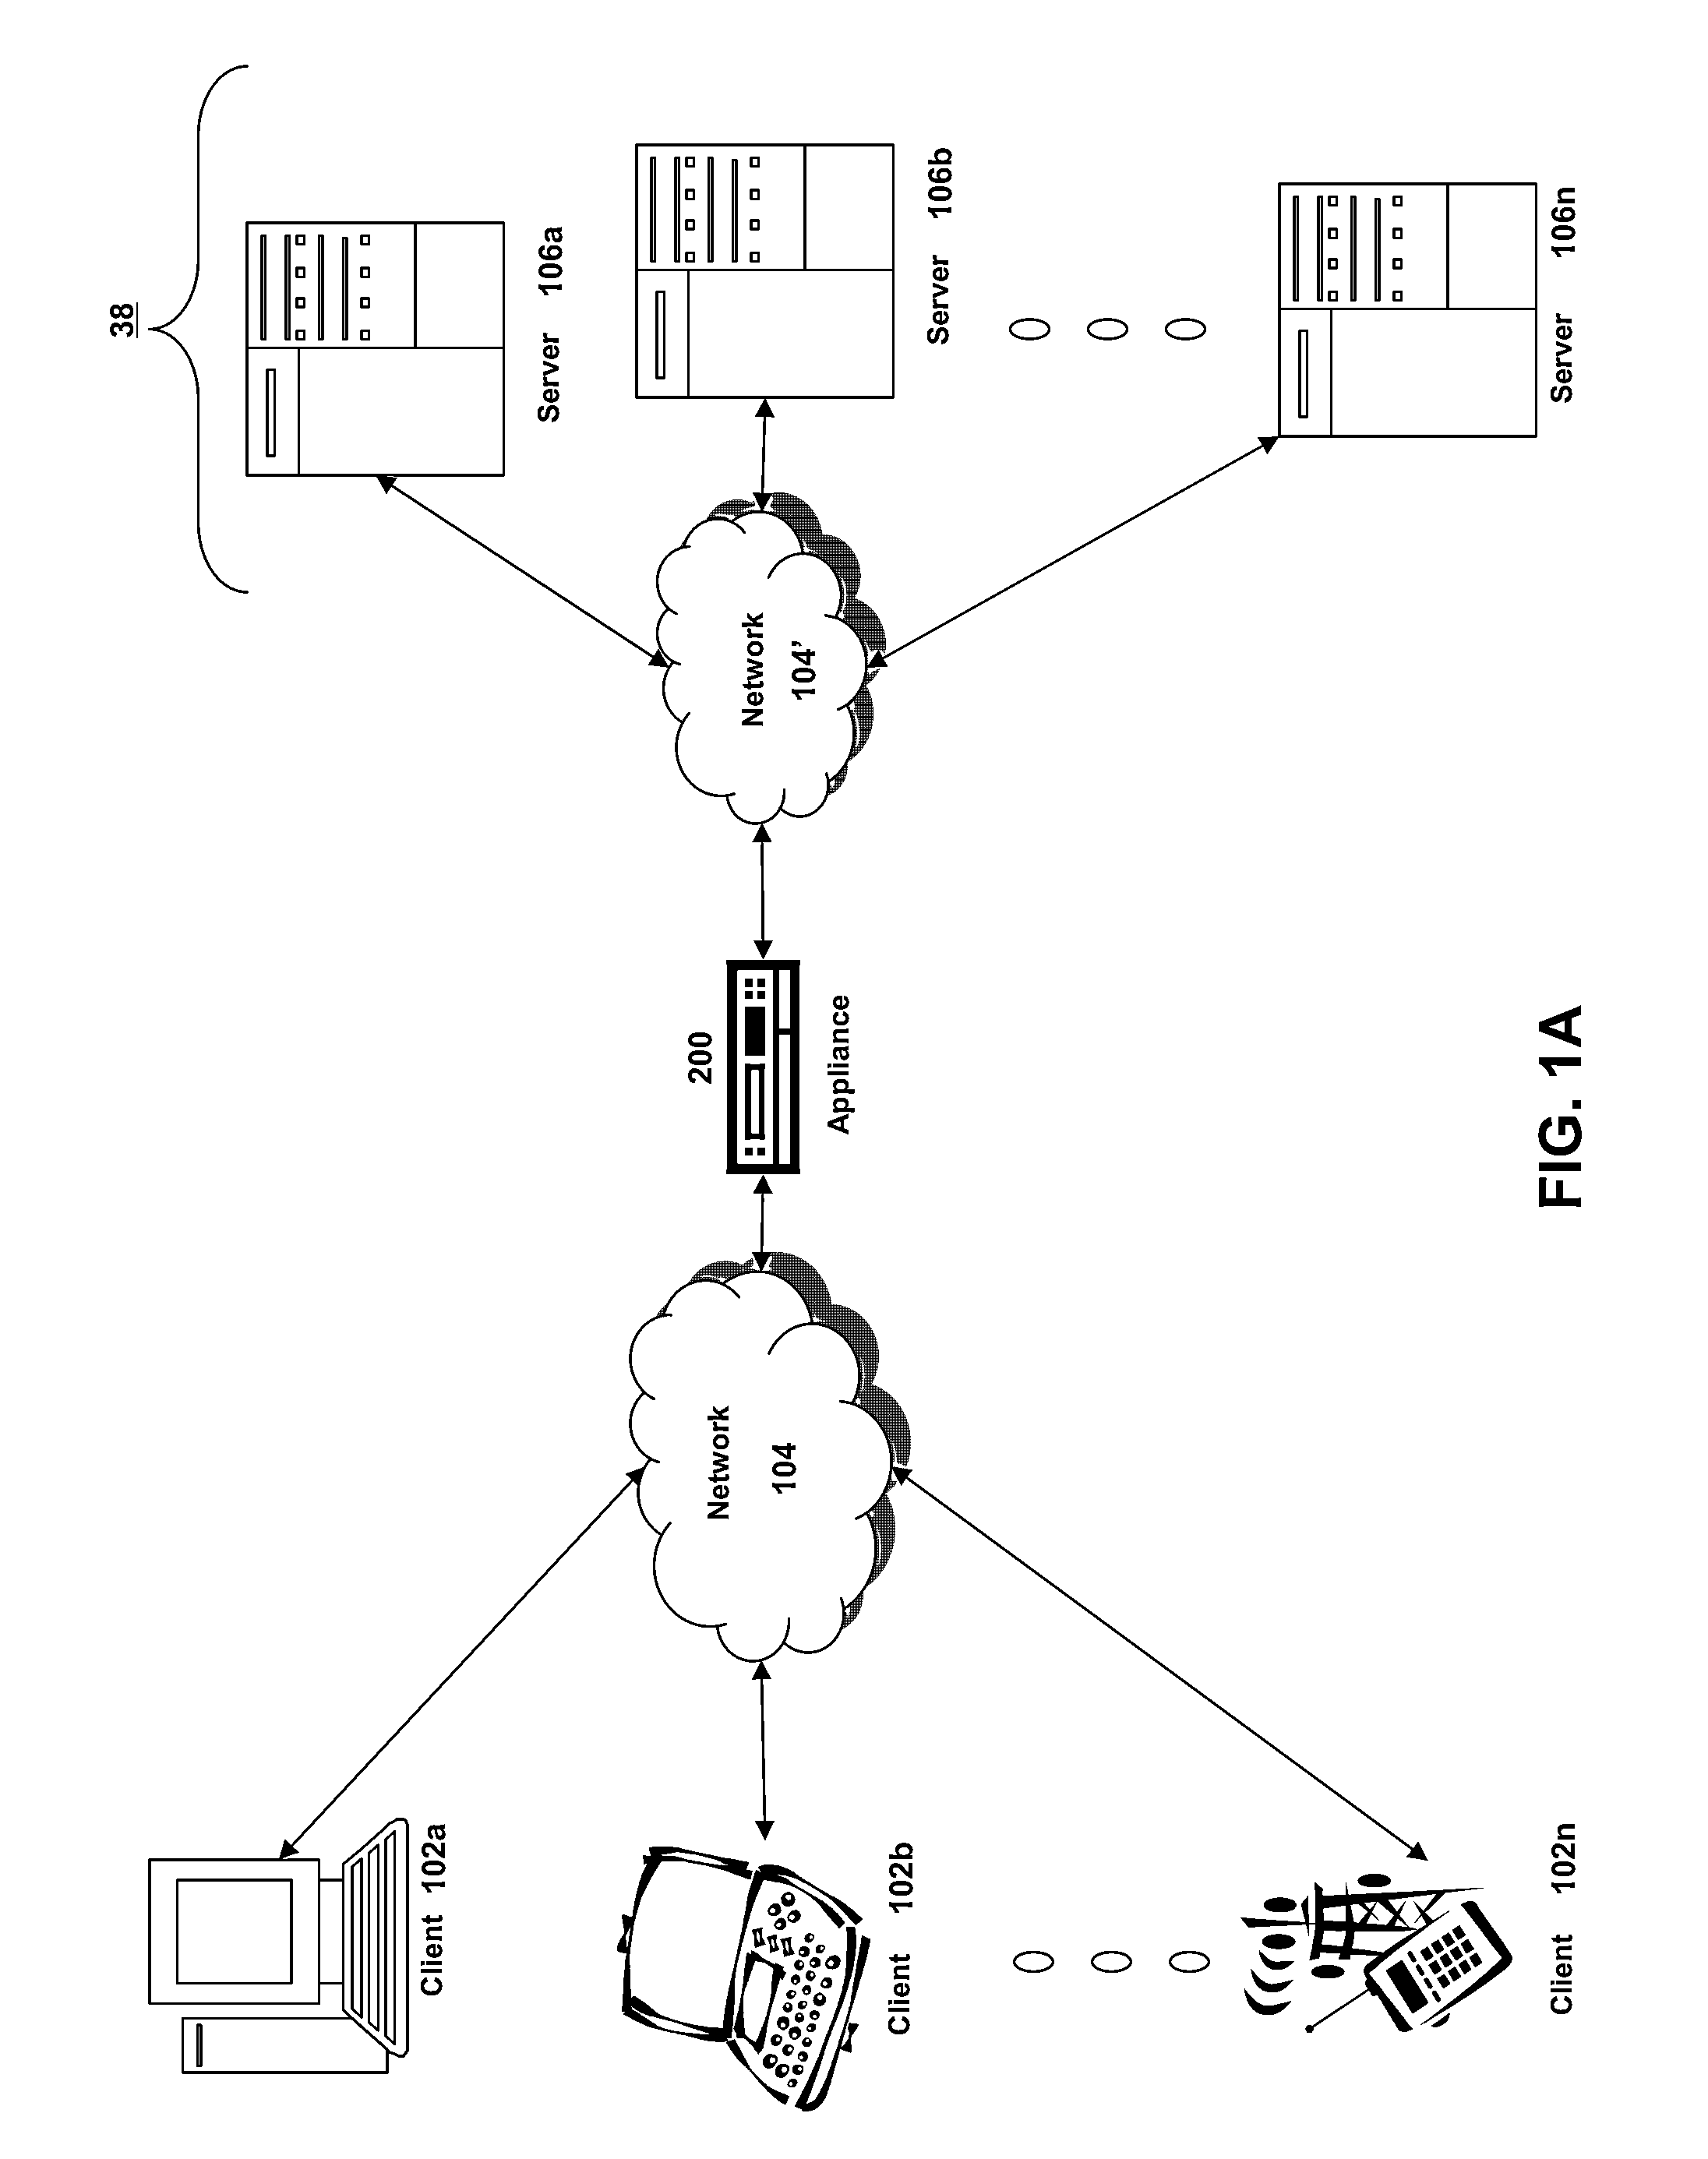 Systems and methods for synchronizing MSS and PMTU in Ncore and cluster systems